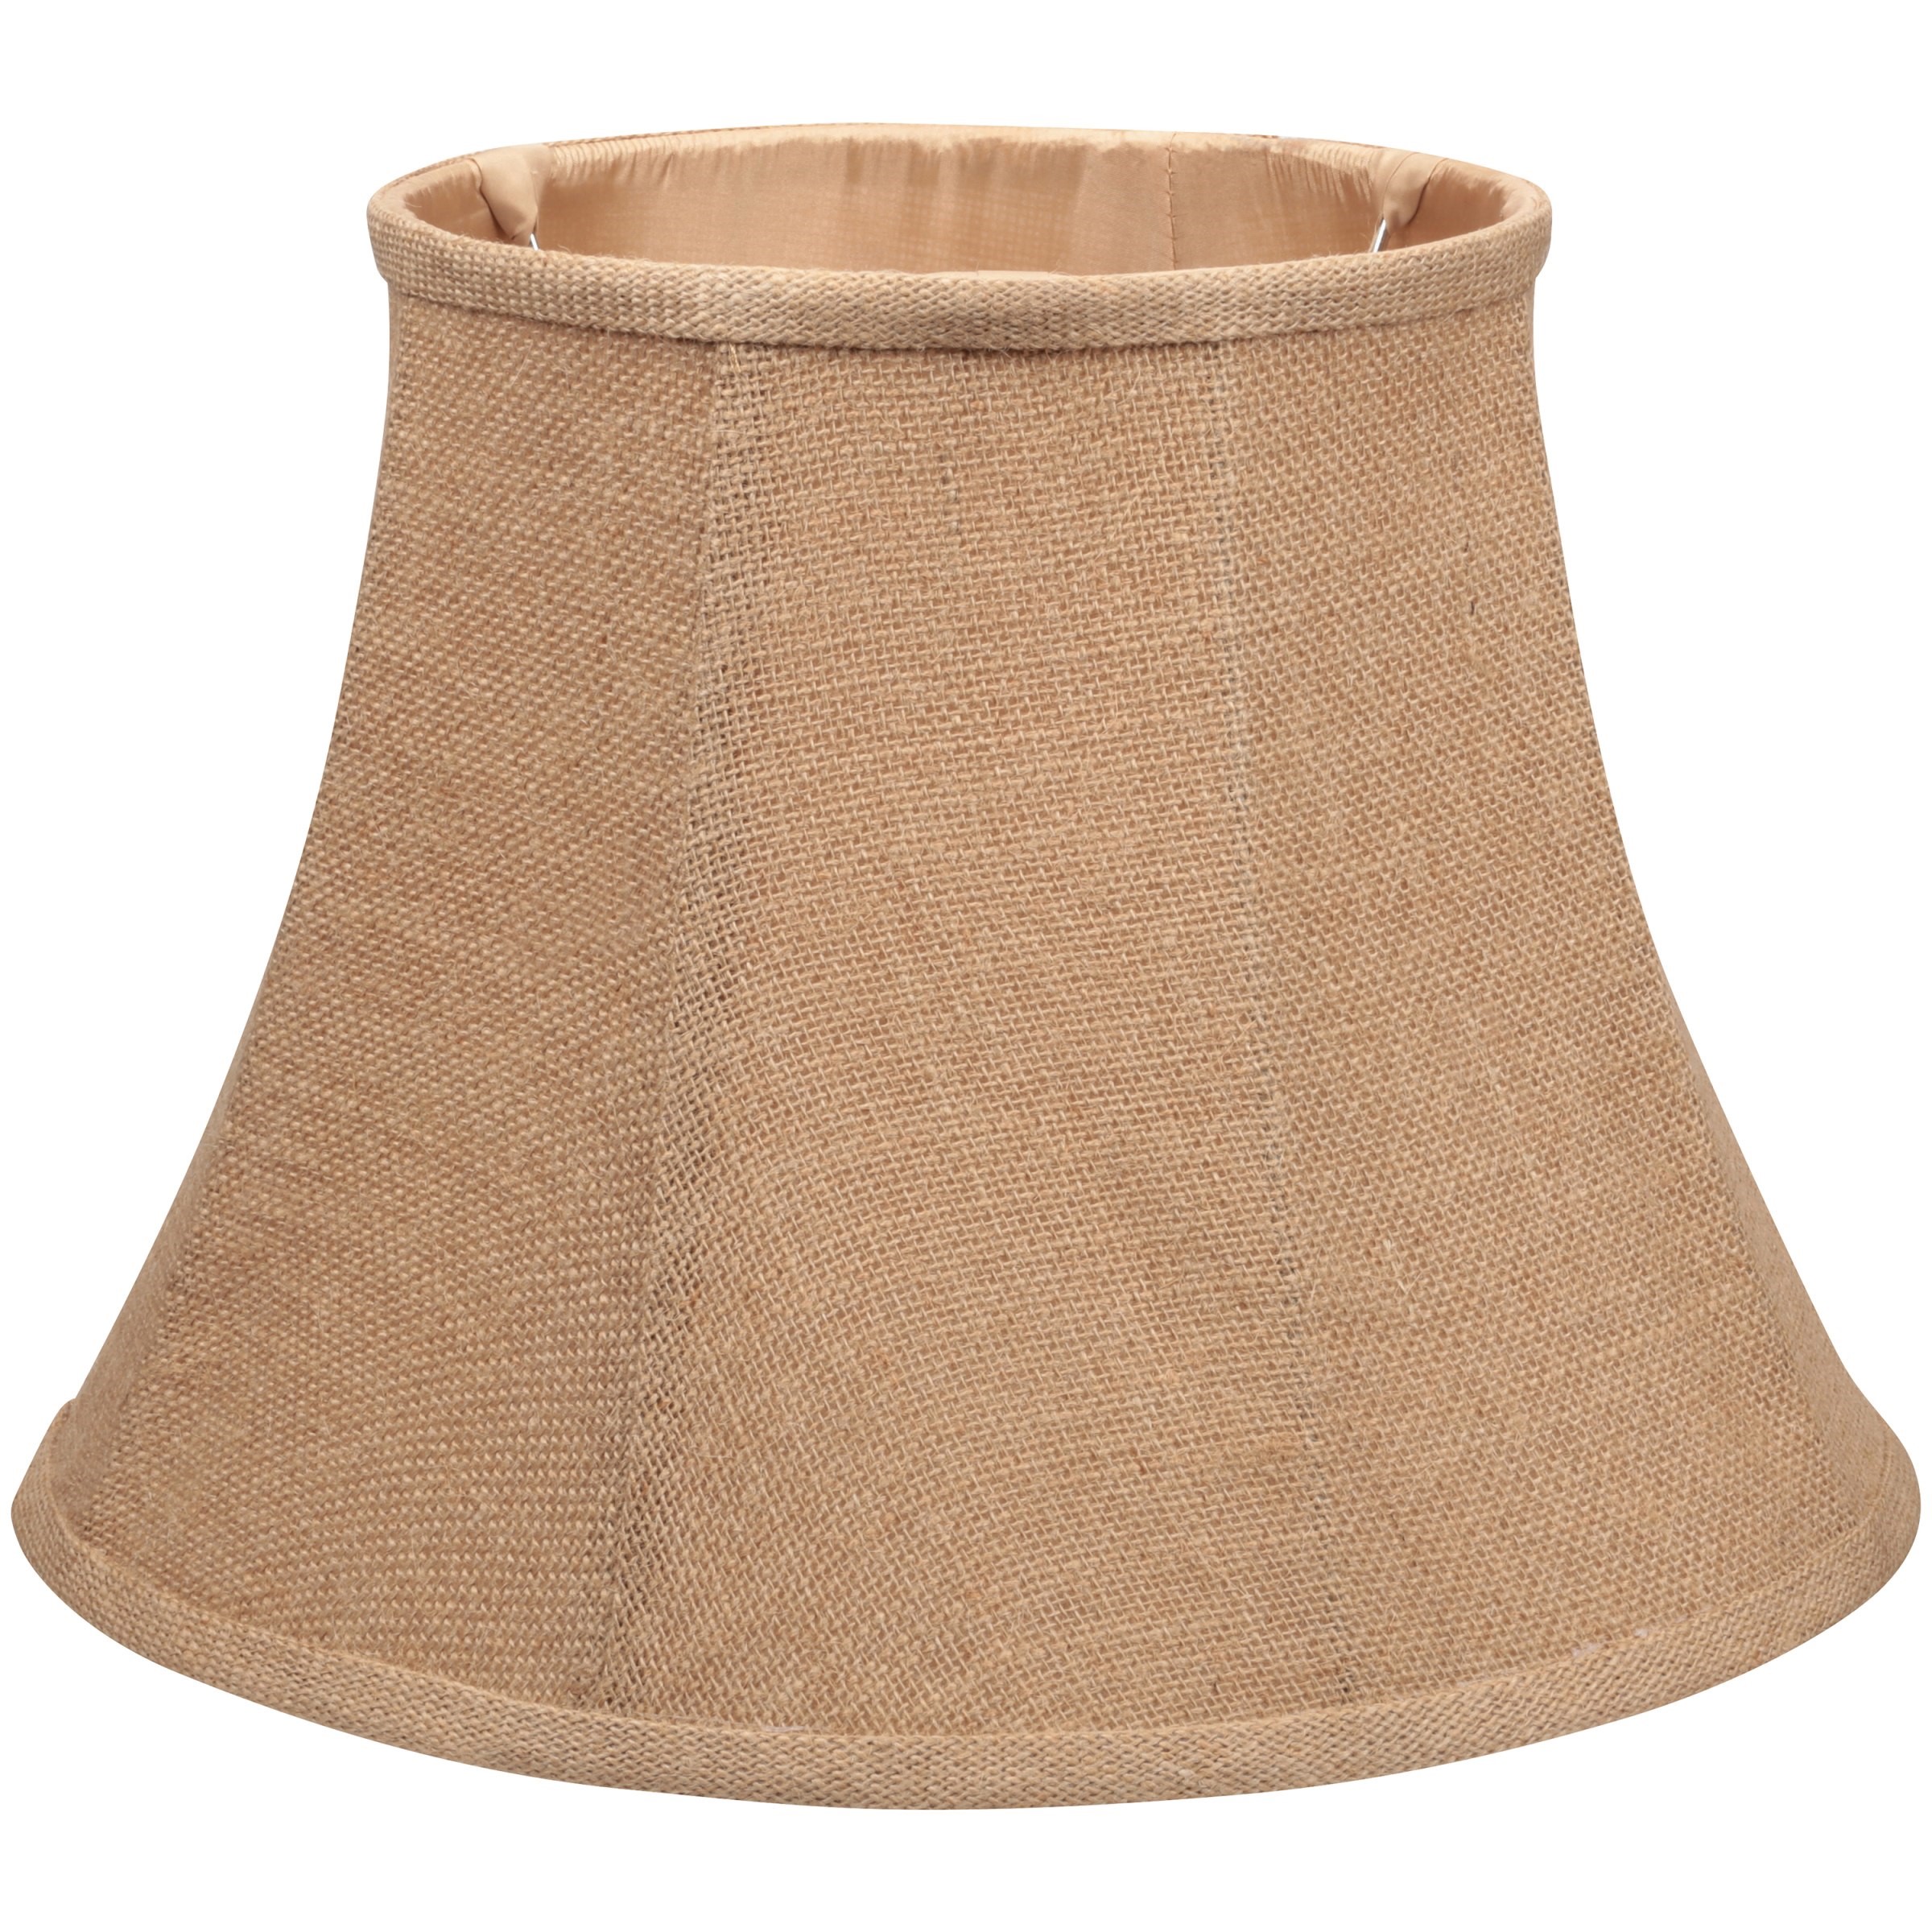 Better Homes and Gardens Burlap Tapered Bell Shade - image 1 of 3